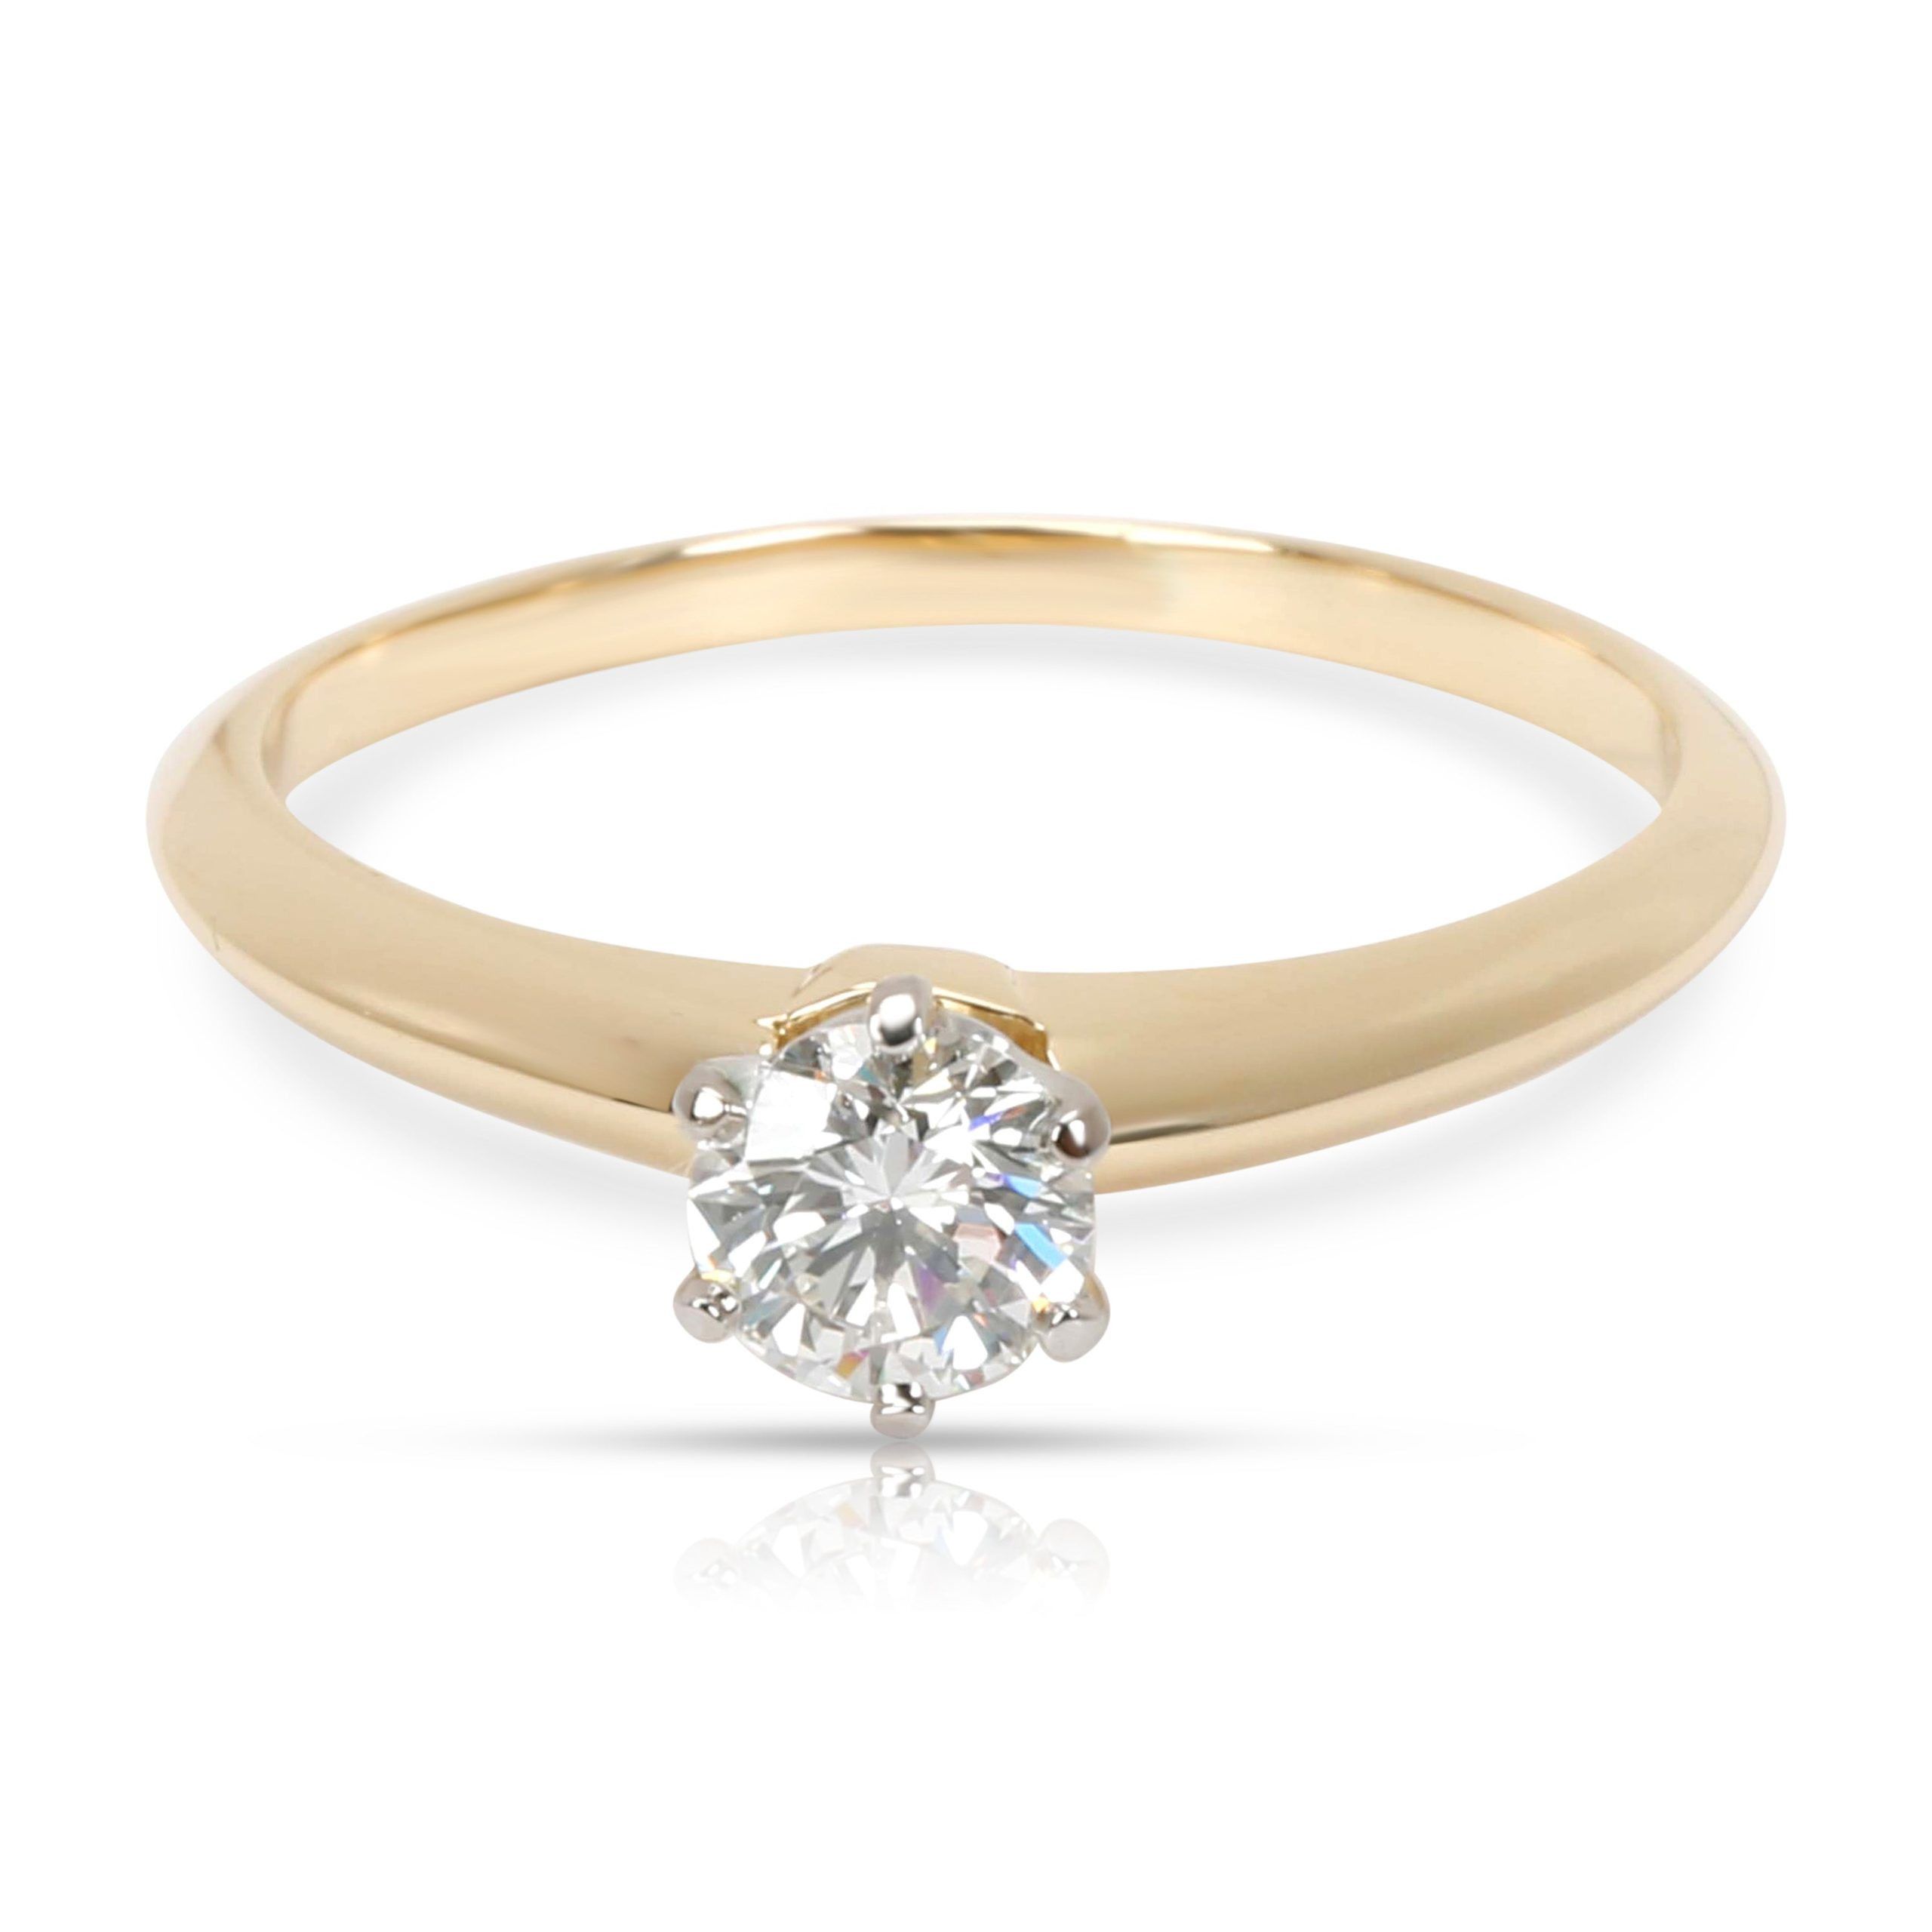 Tiffany & Co. Tiffany & Co. Solitaire Diamond Engagement Ring in 18K Gold I VVS2 0.41CTW Size ONE SIZE - 1 Preview